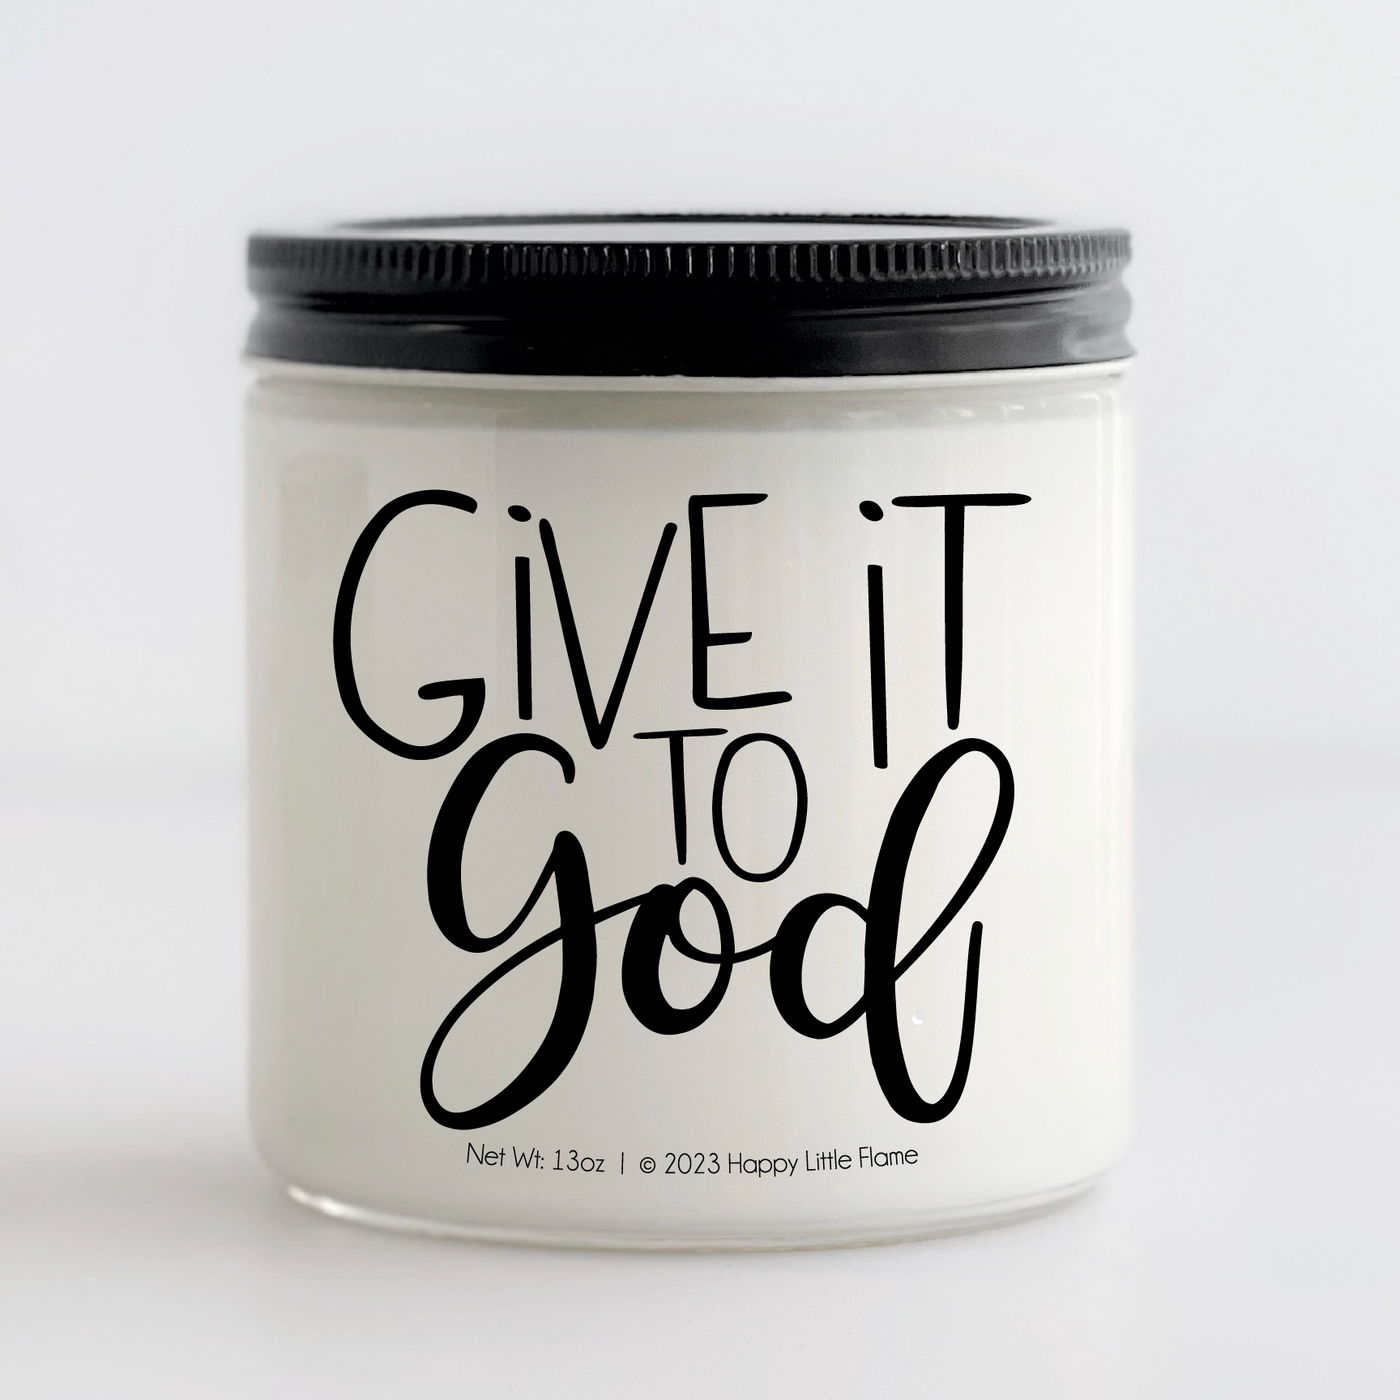 Give It To God